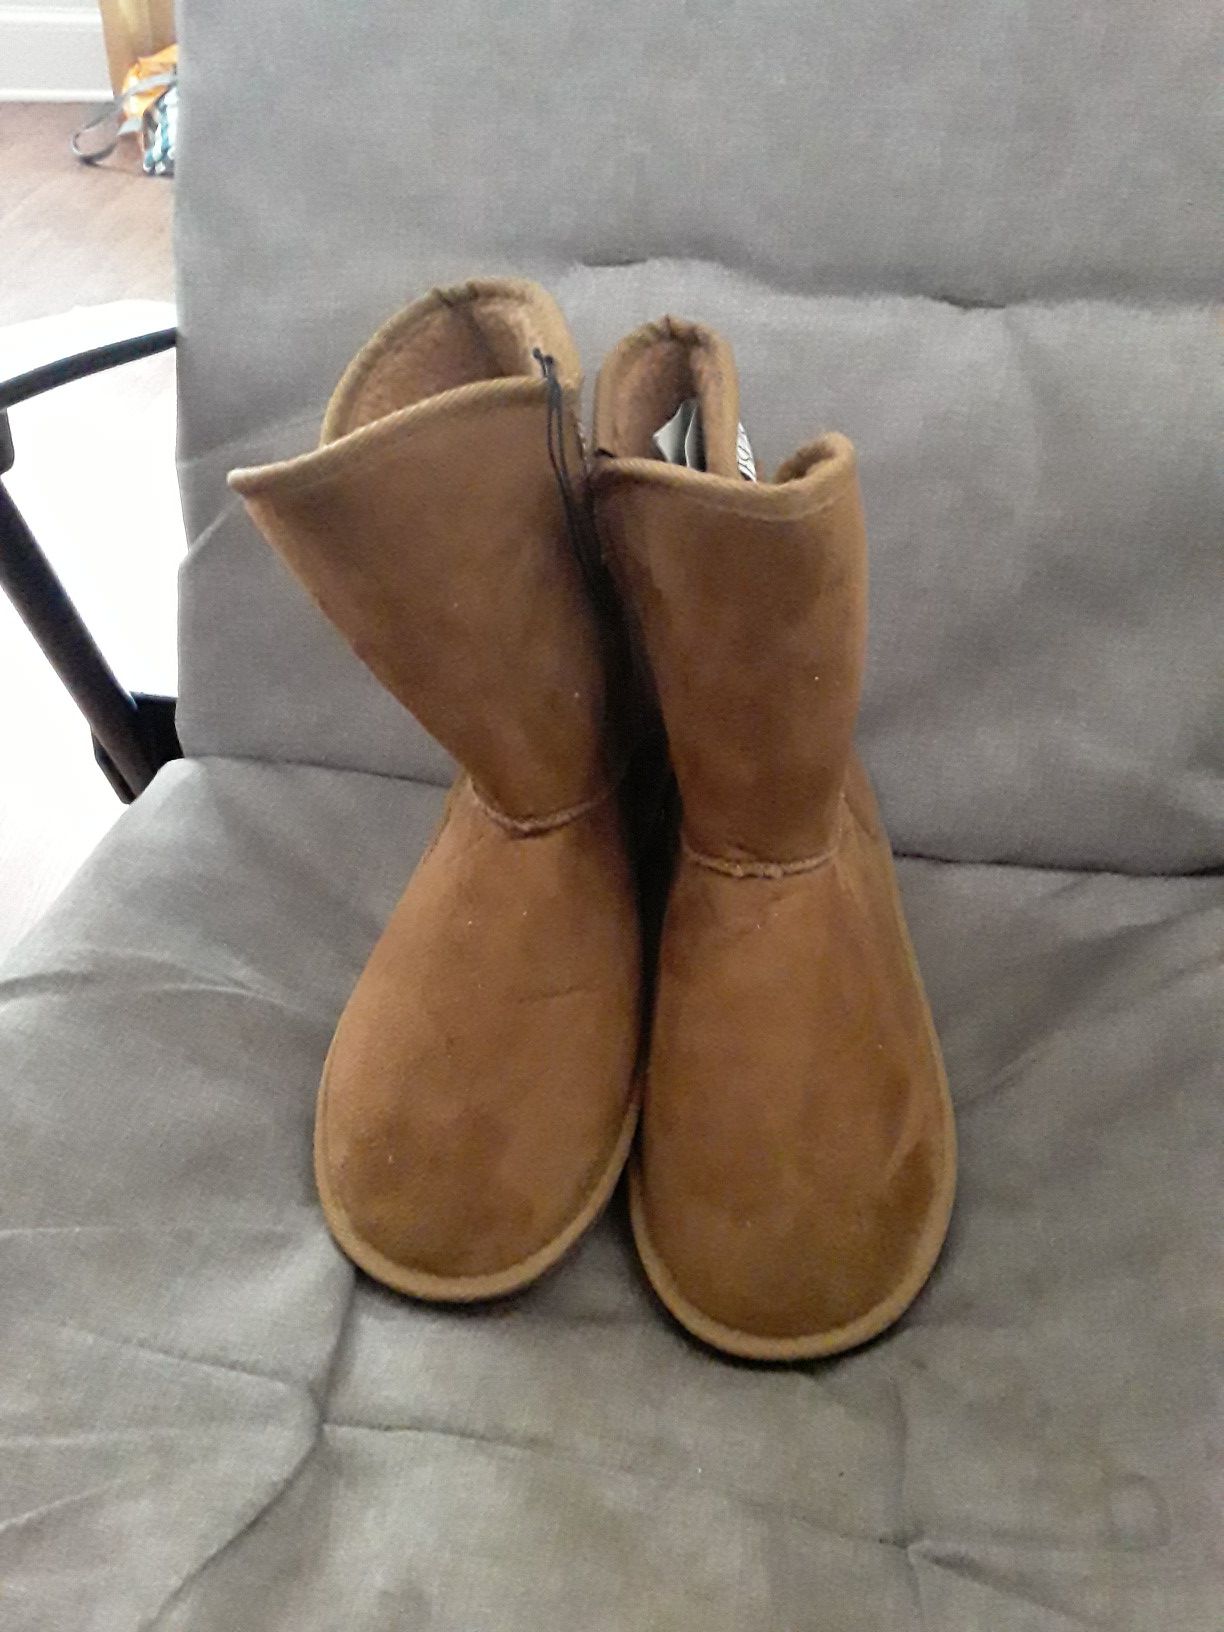 Women's Boots - Size 9 - Brand New Never Worn